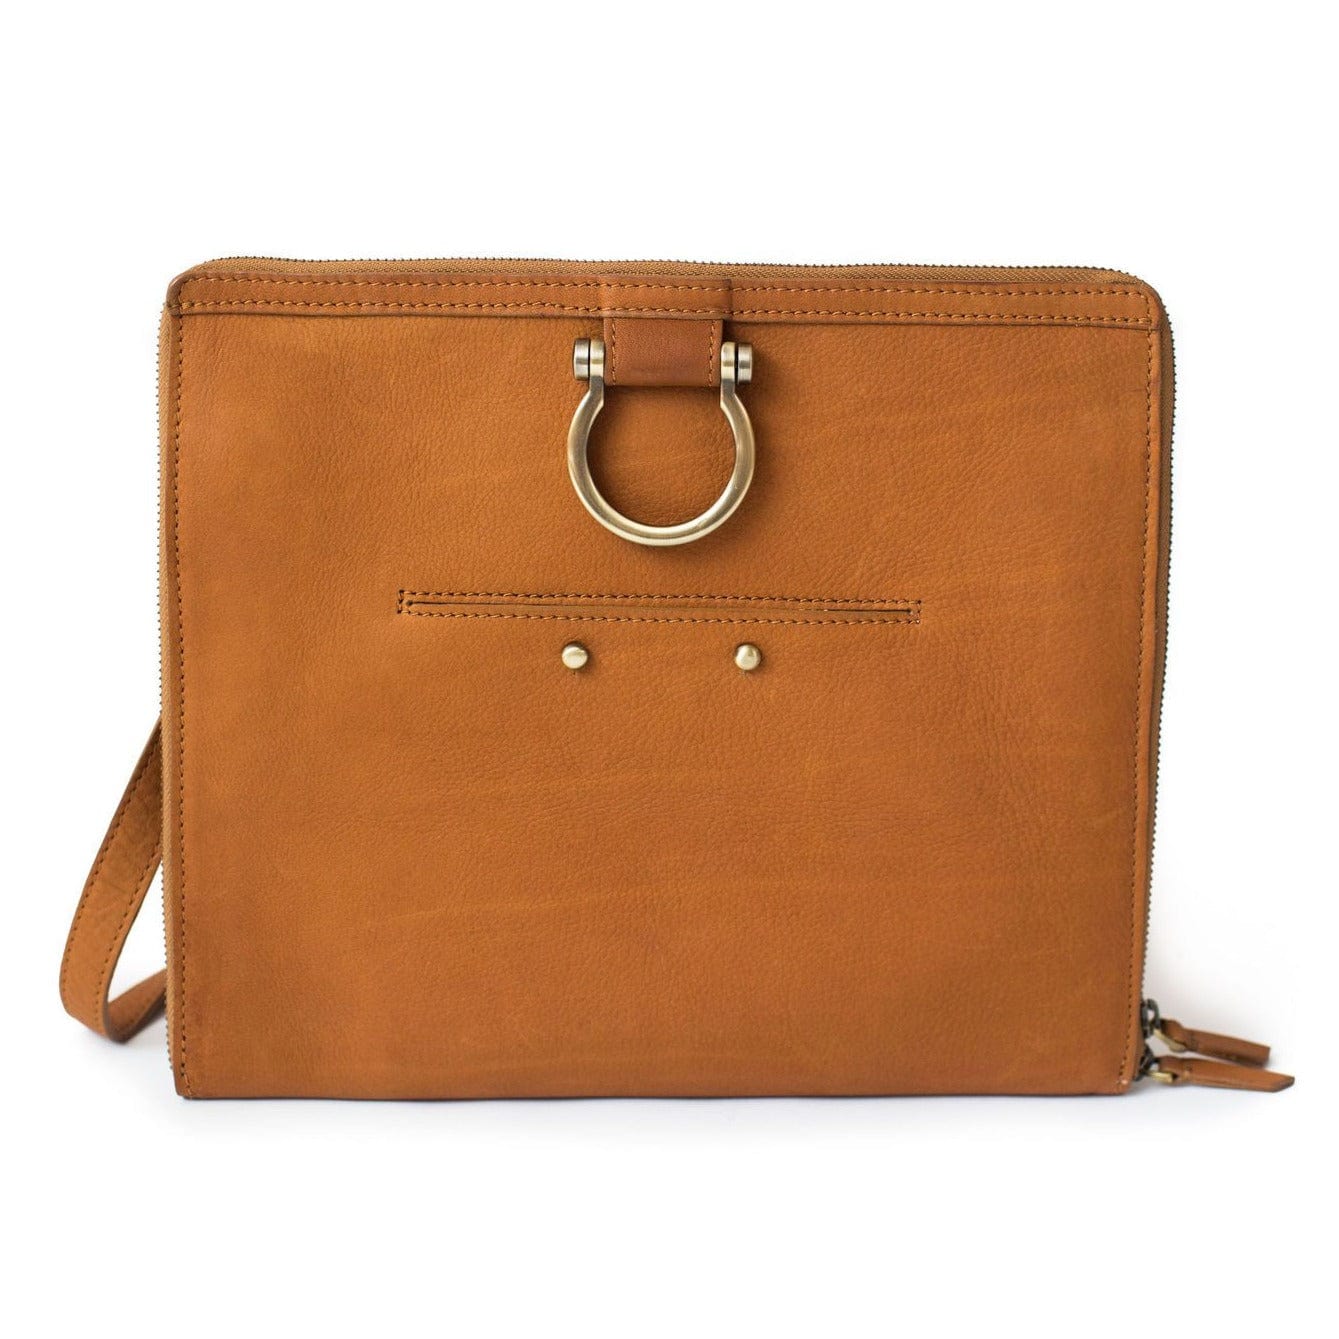 The M crossbody bag in whisky tan raw leather has a zip enclosure, front exterior pocket, and Omega hardware.